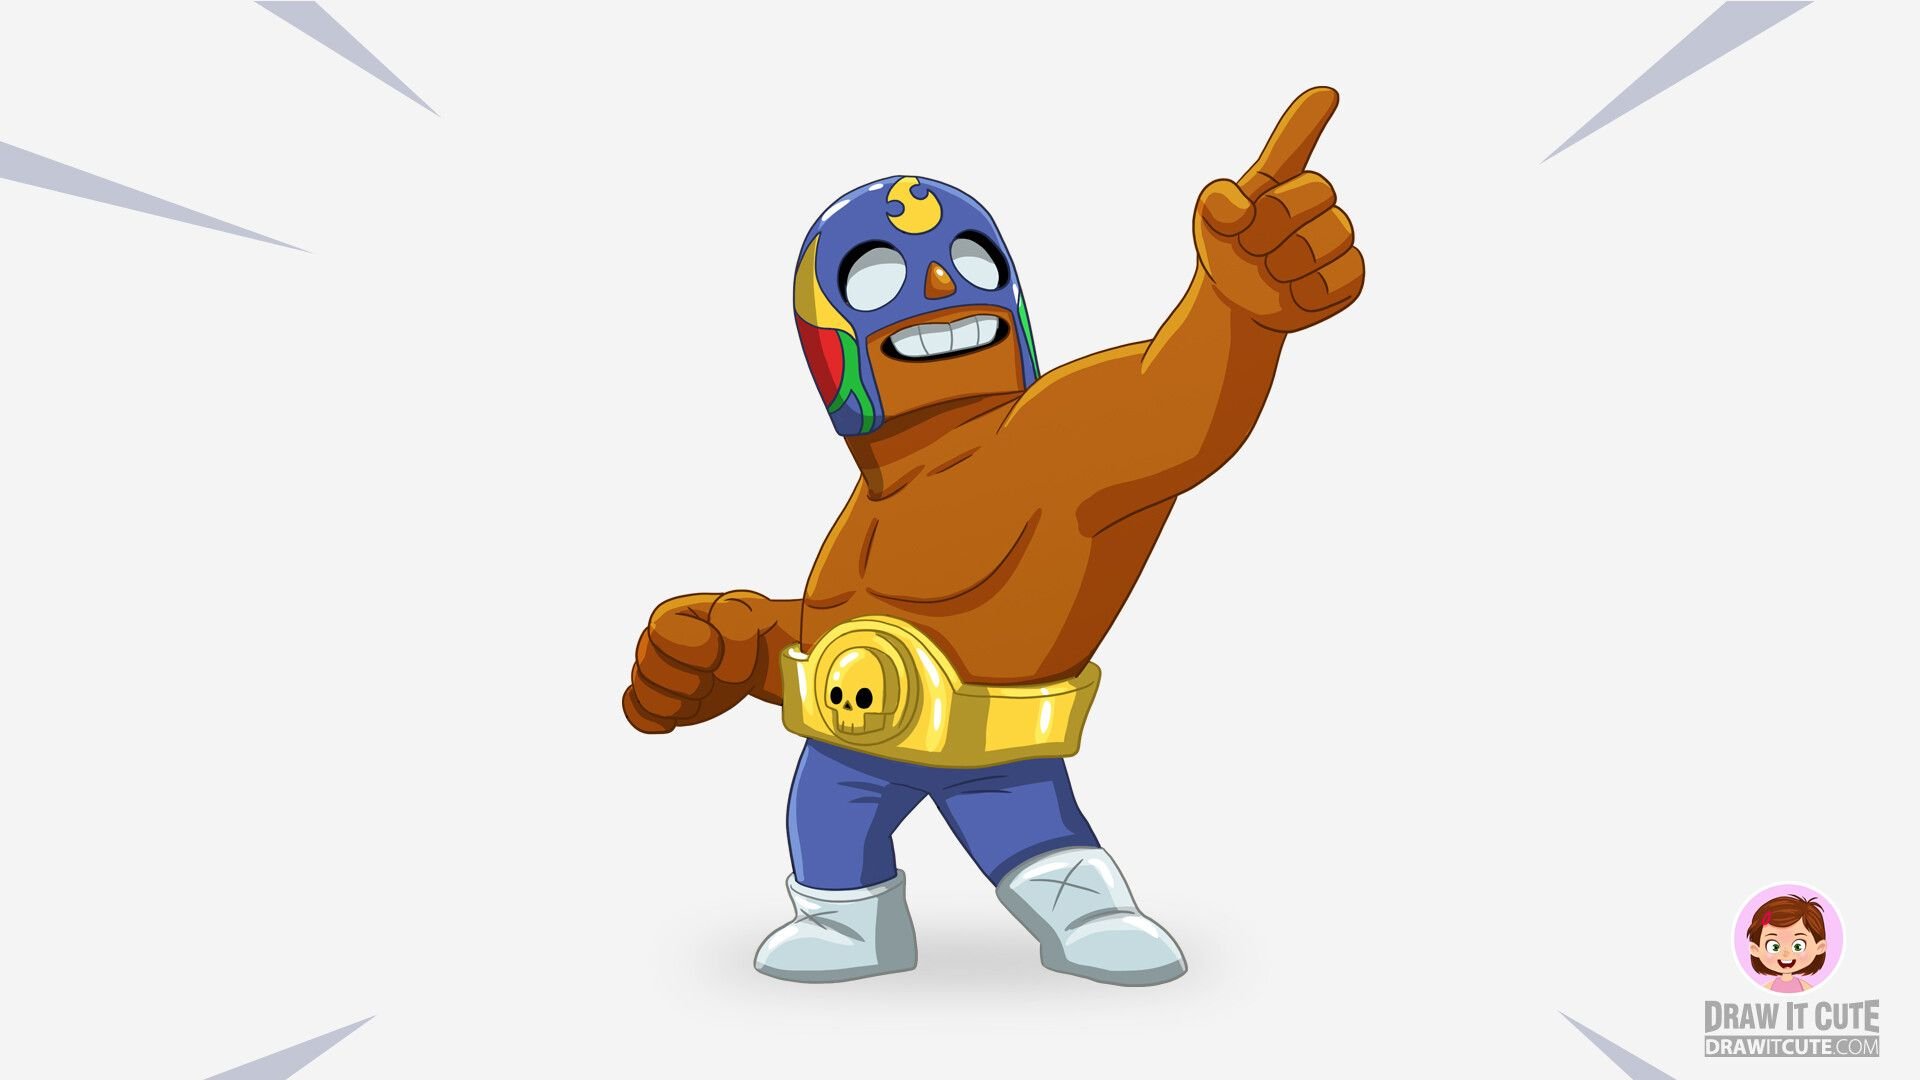 How to Draw El Primo super easy. Brawl Stars drawing